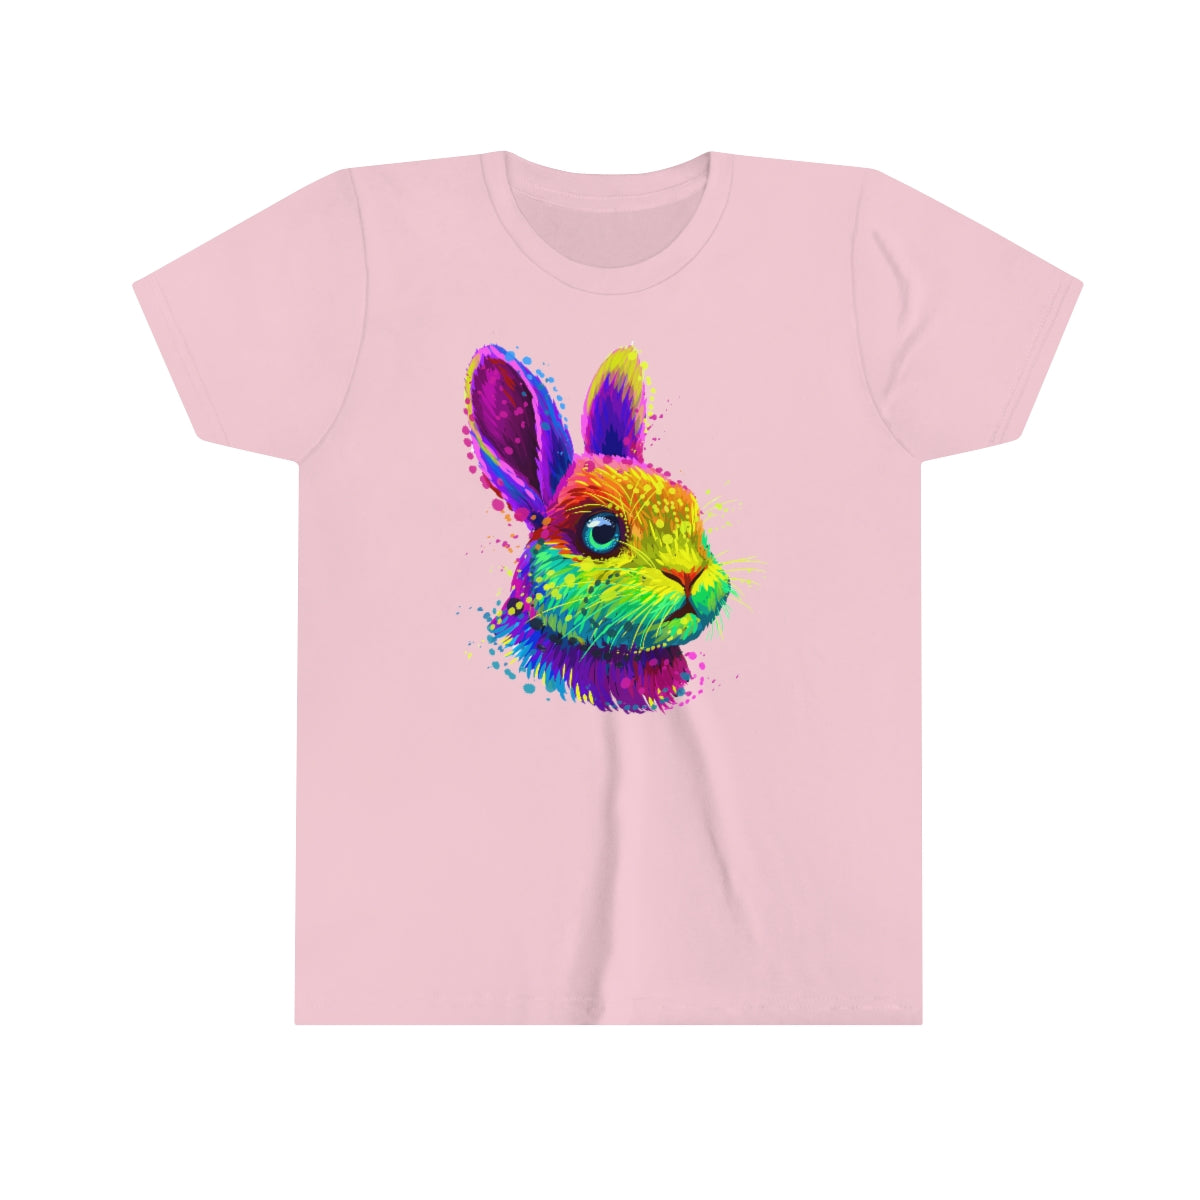 Youth Short Sleeve Tee "Abstract colorful little rabbit"